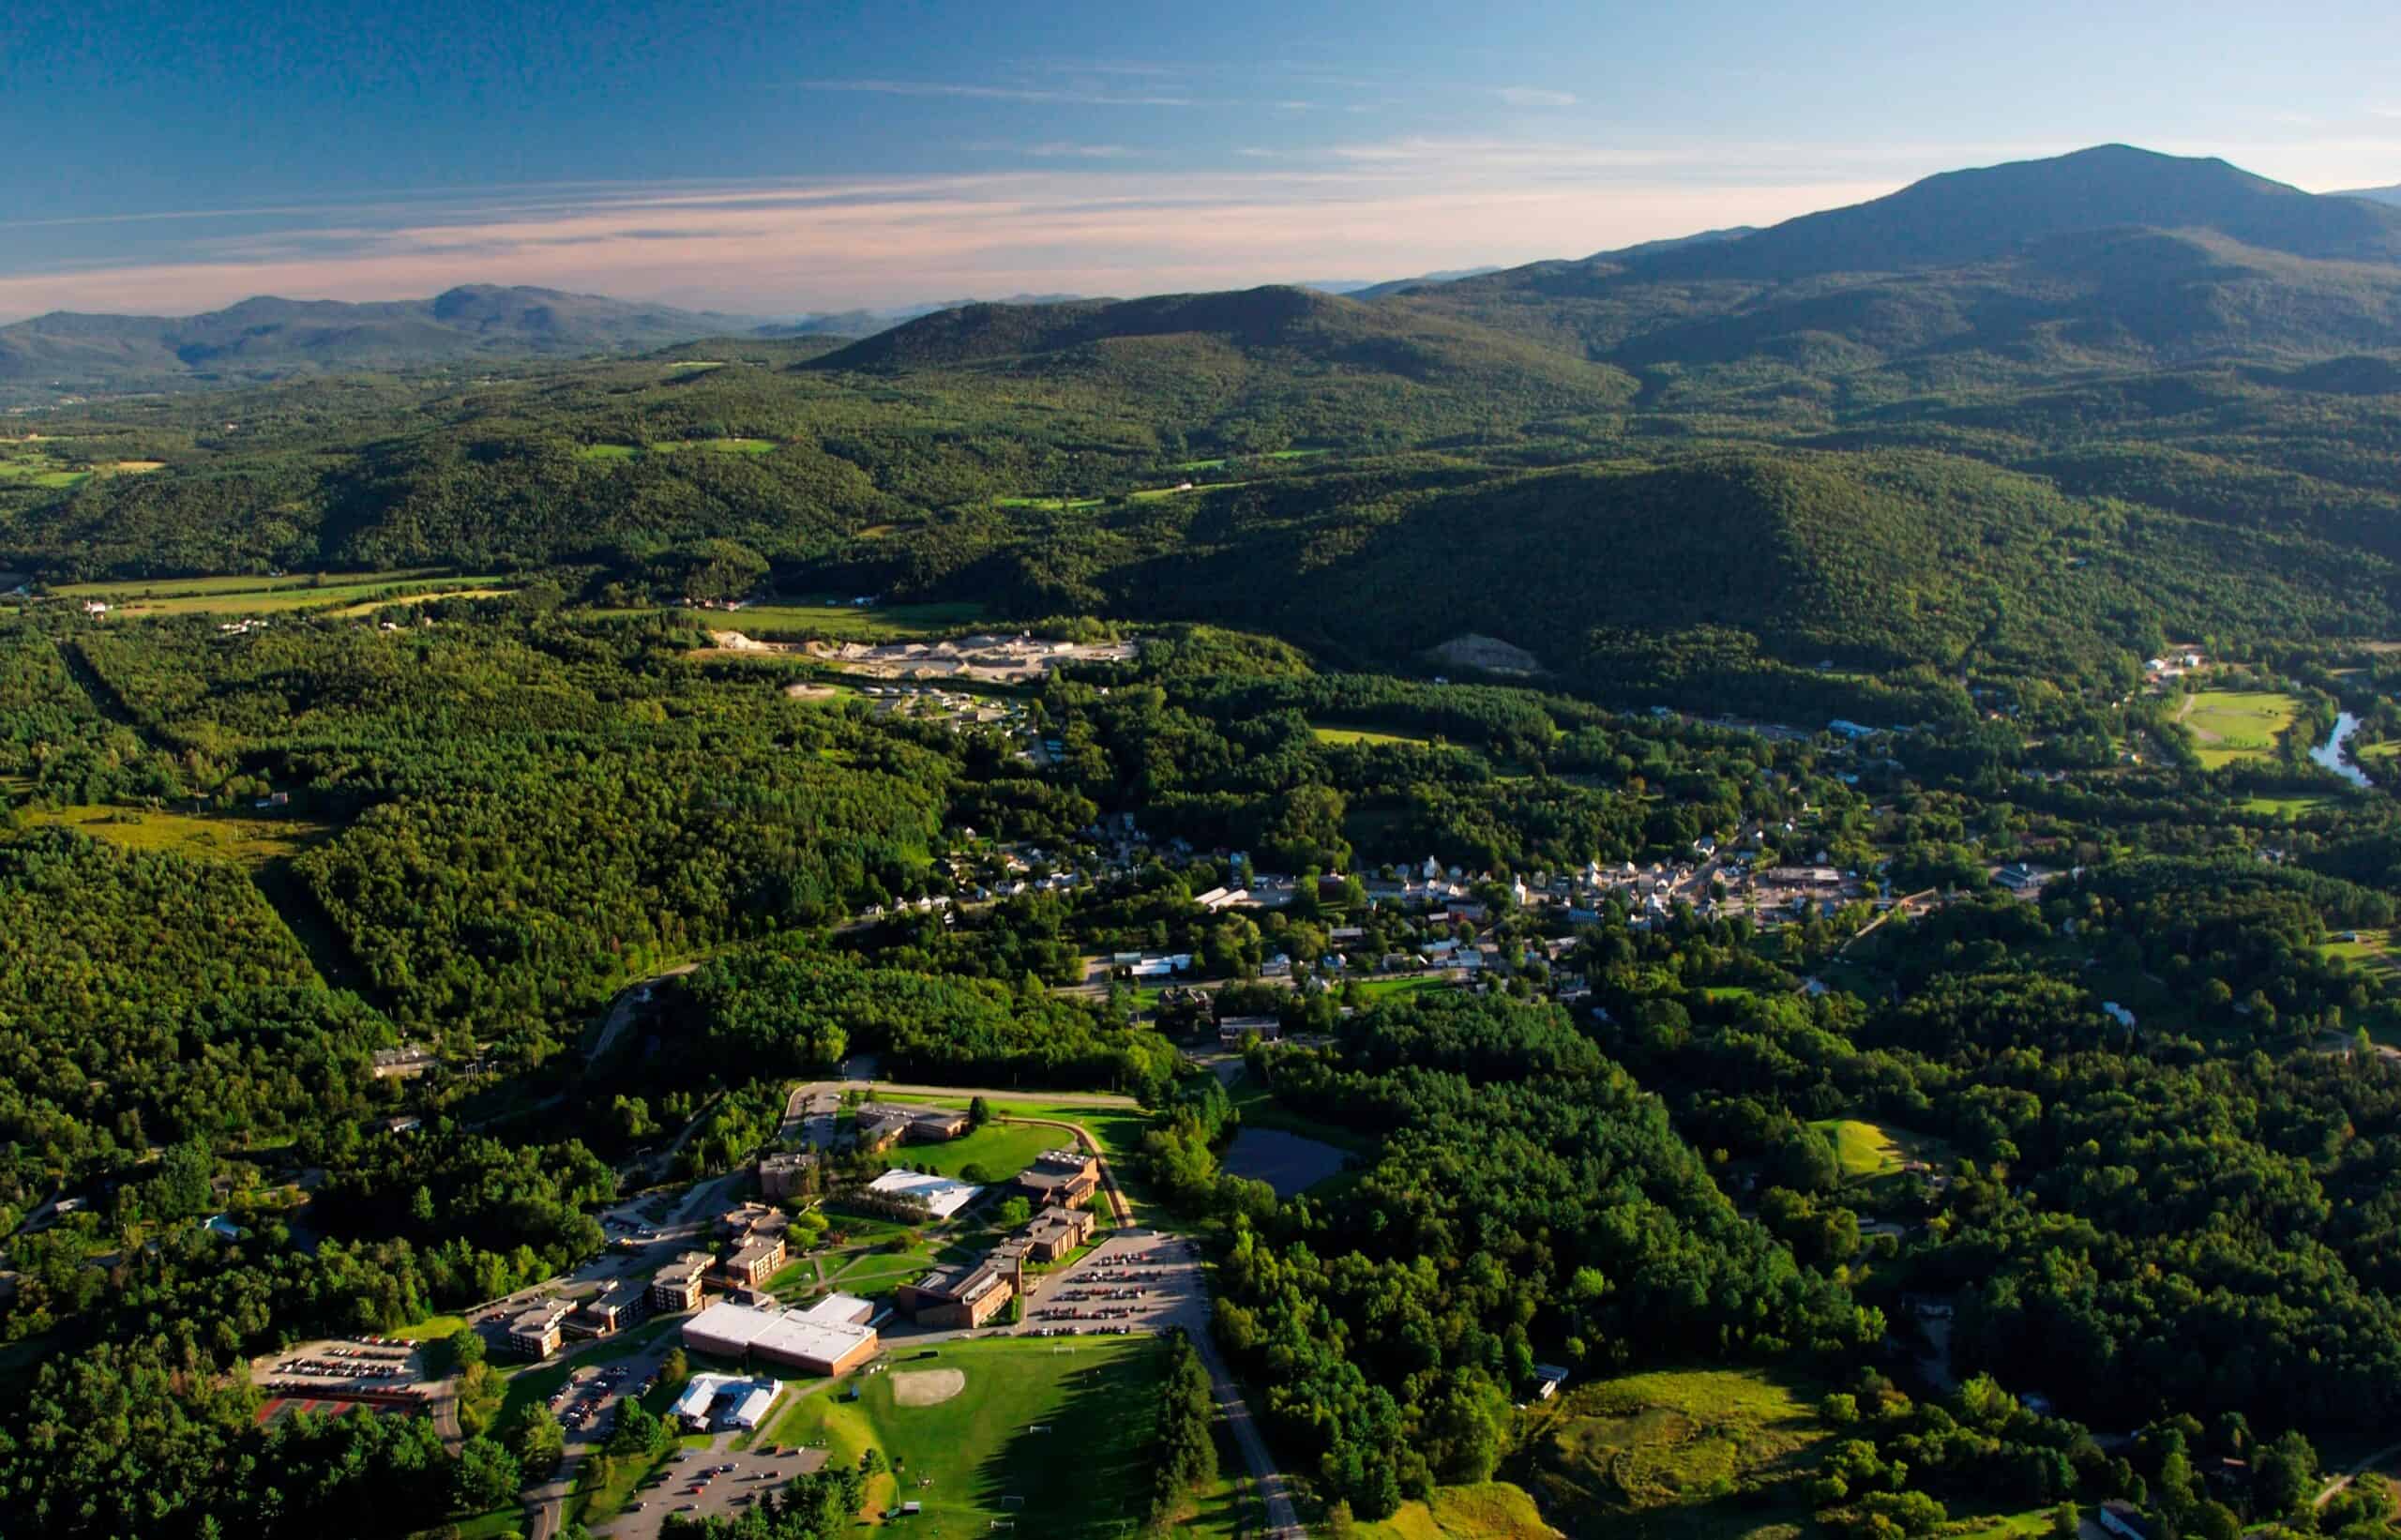 A drone image from high above the Johnson campus. You can see all of the surrounding mountains and towns.